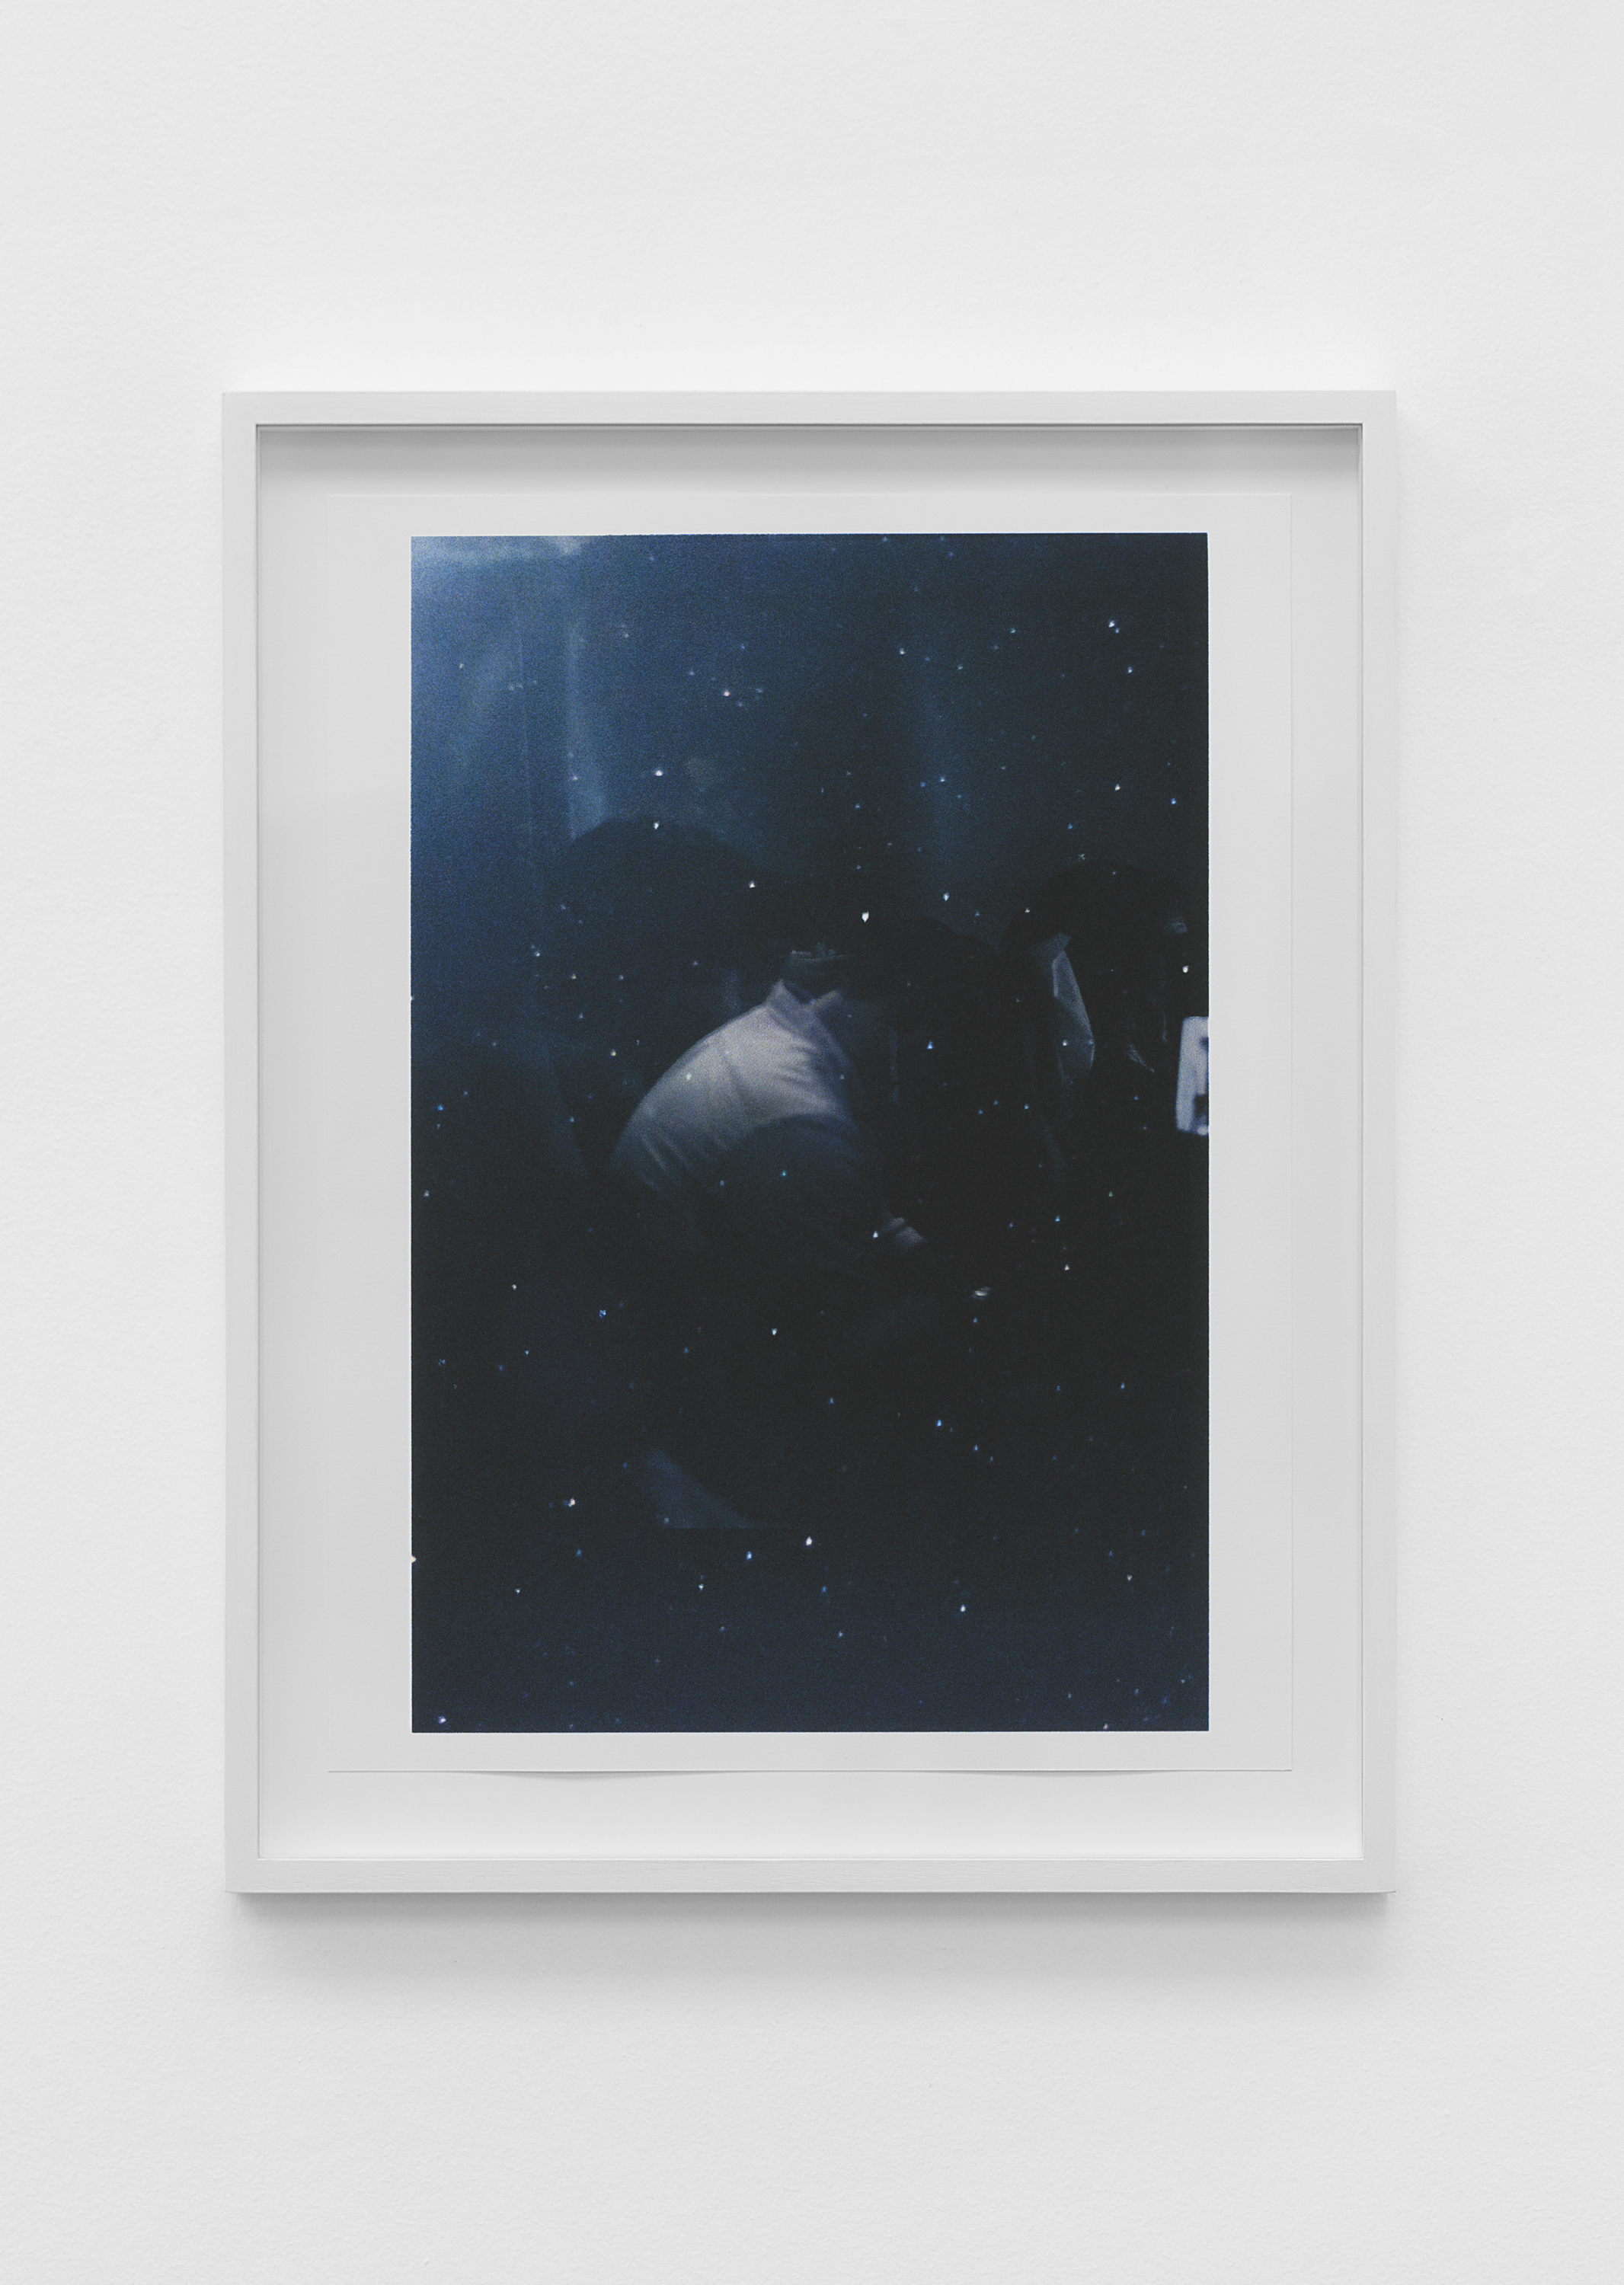   Untitled (figure, glass, stars) , pigment print on paper, sheet: 48.8 × 36.7 cm (19 1/4 × 14 1/2 in), framed: 56.3 × 47.1 cm (22 1/8 × 18 1/2 in), 2019 